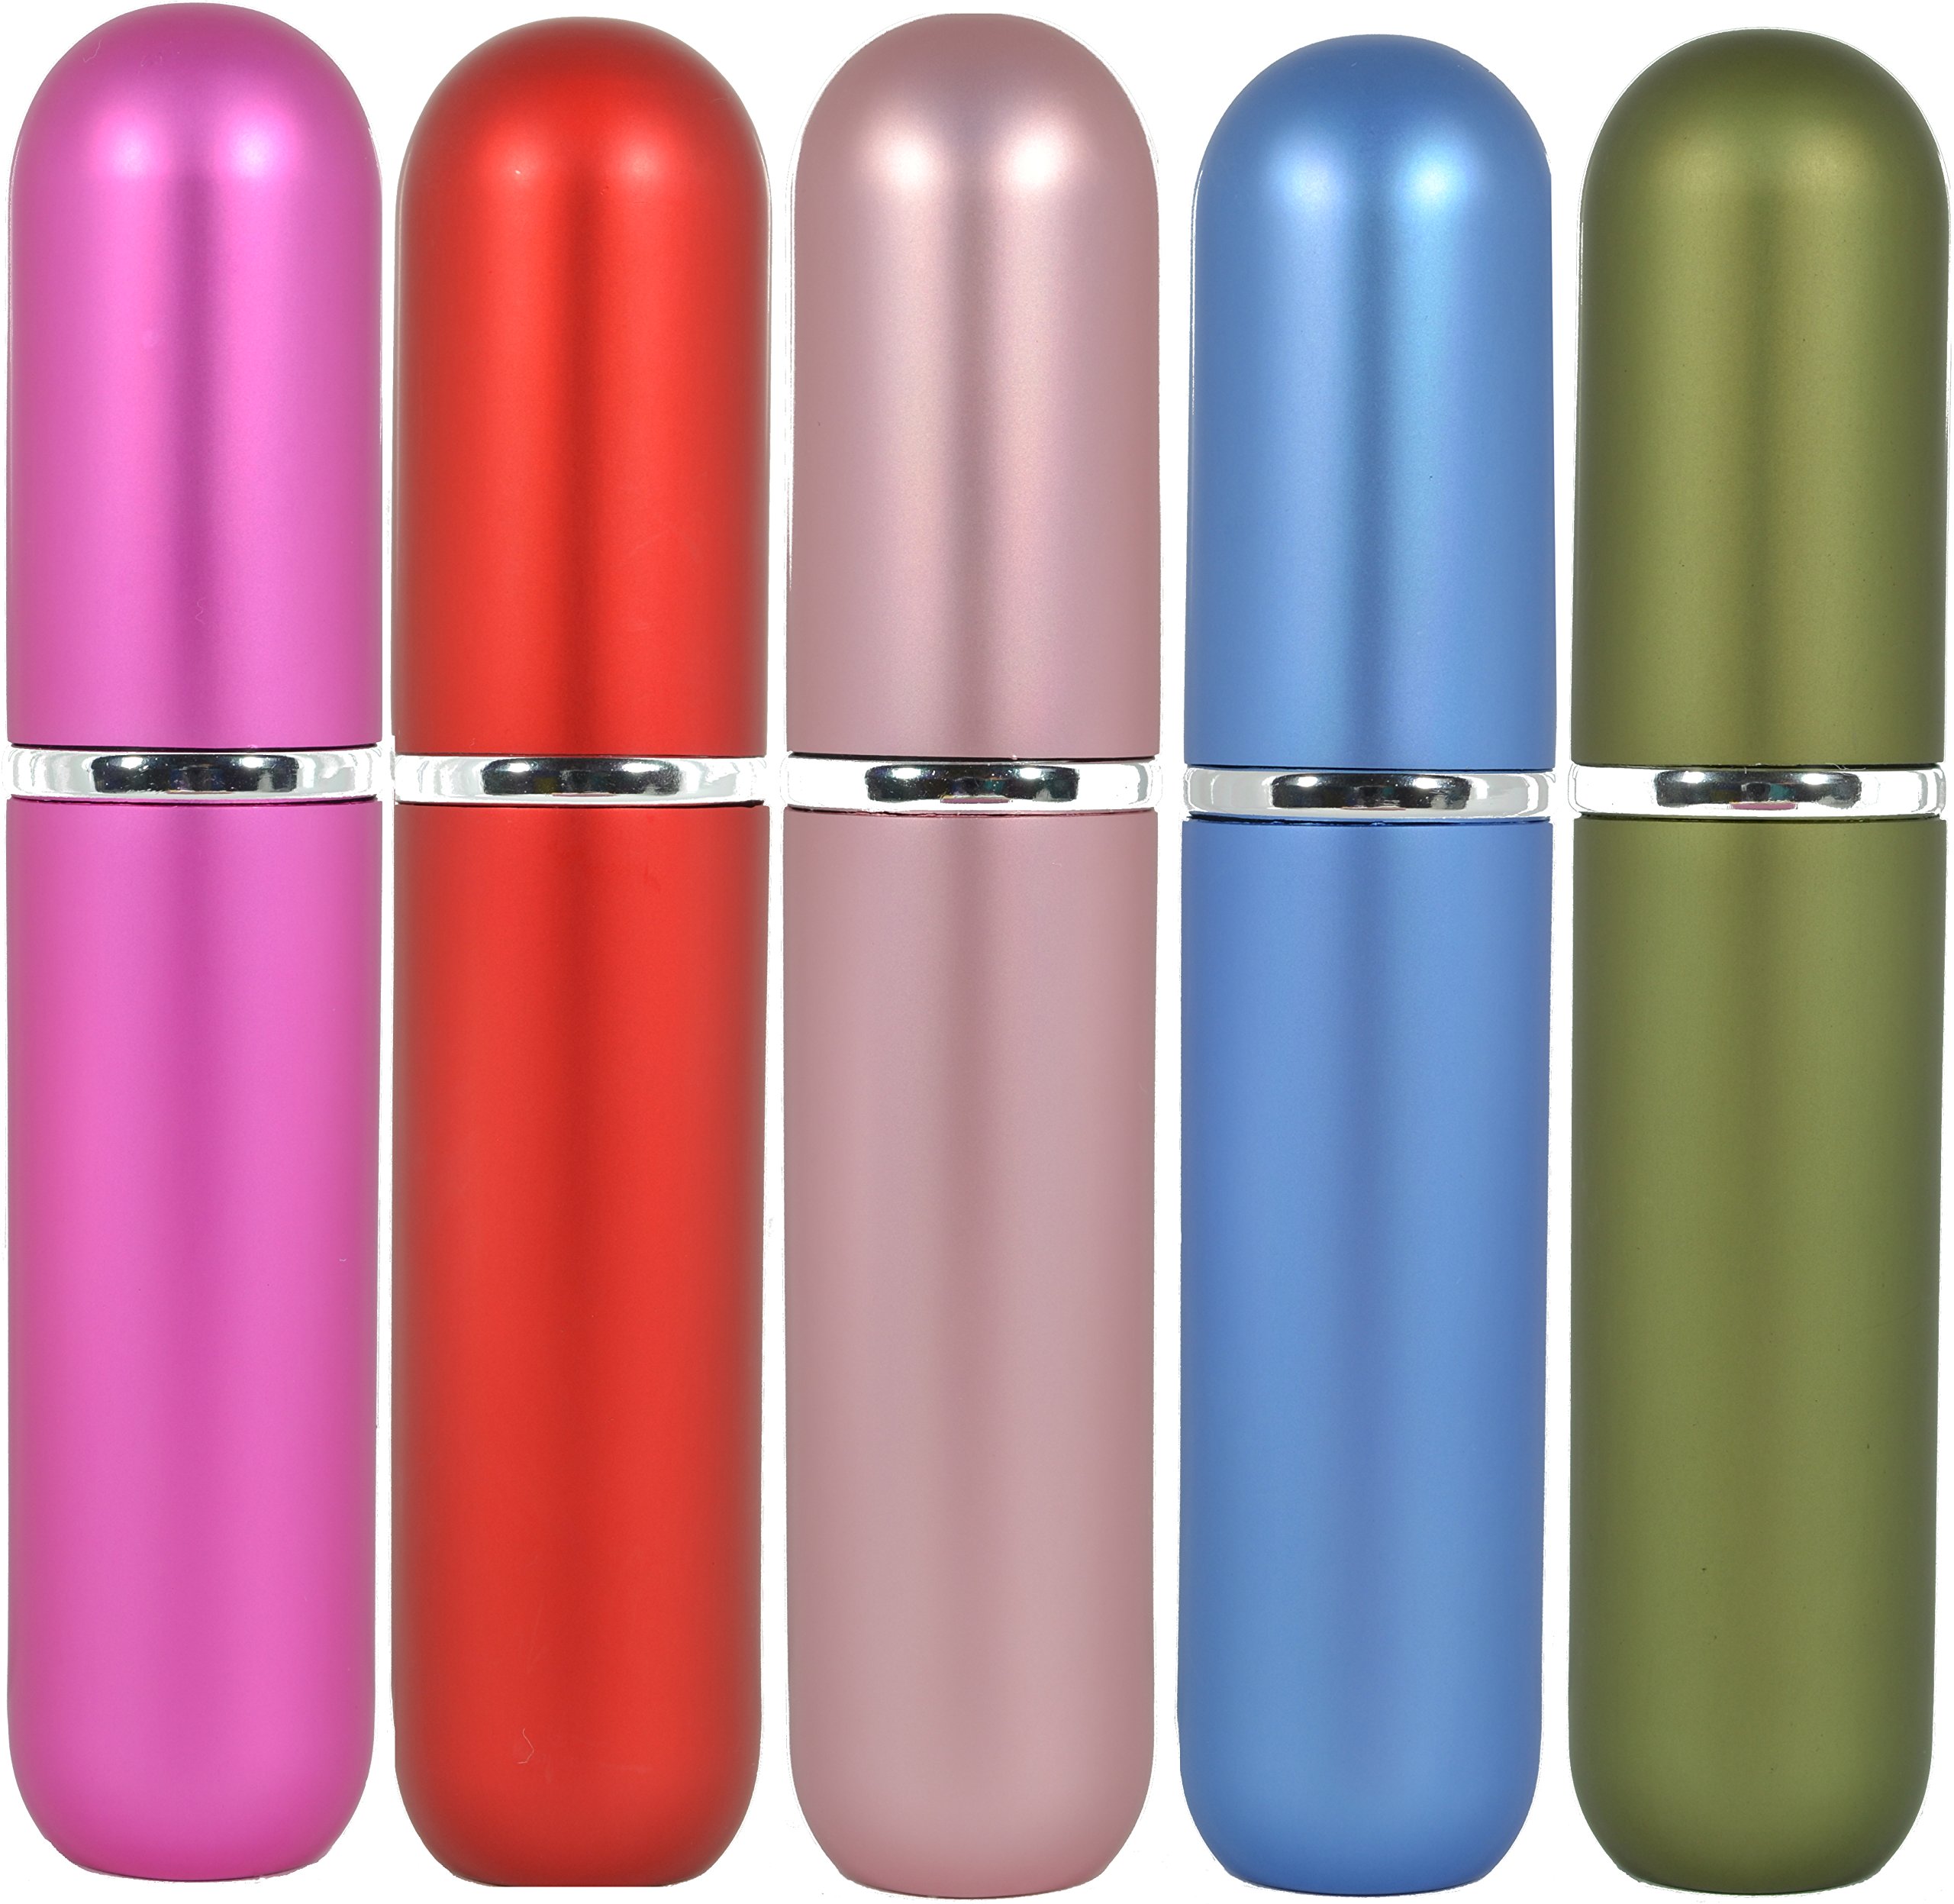 Prime Natural Essential Oil Blank Aromatherapy Aluminum Metal Premium Inhalers- 5 Gorgeous Colors Complete Sets with 10 Cotton Wicks for Nose, Reusable & Refillable